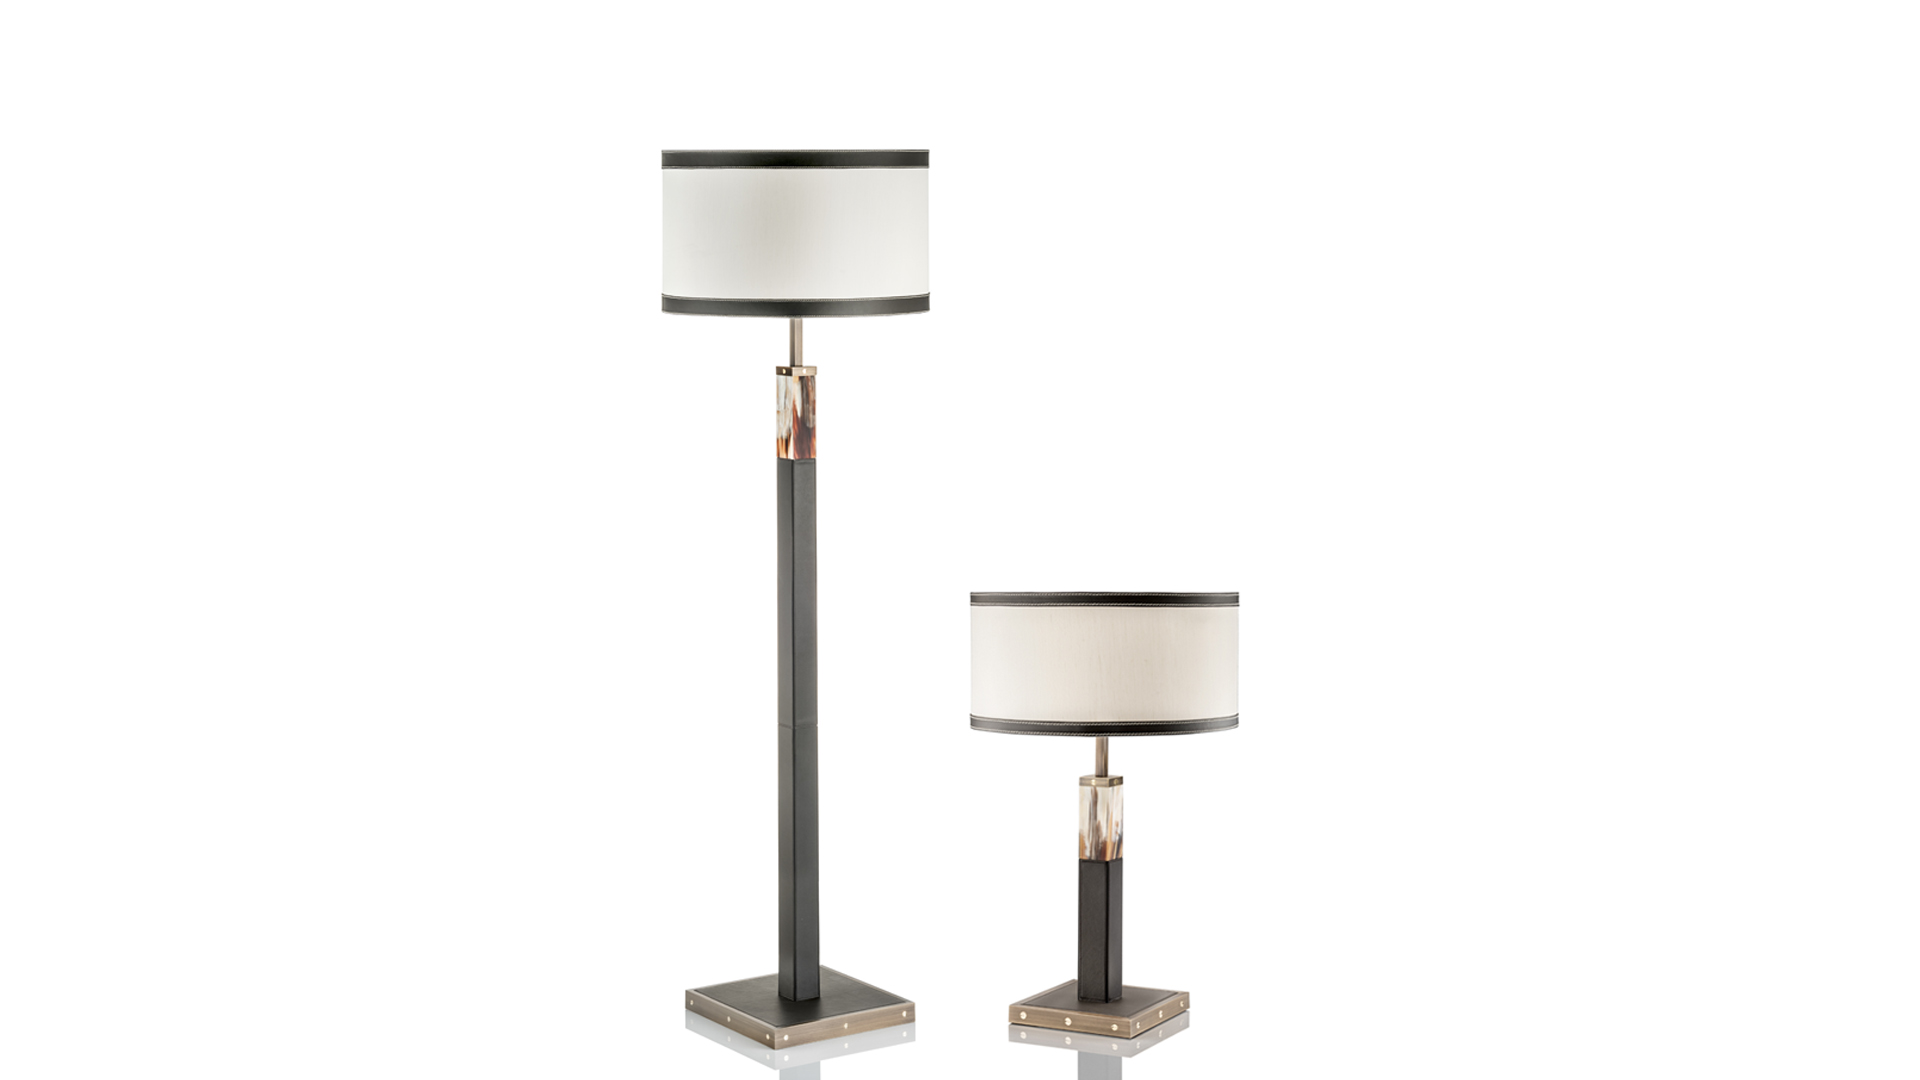 Lamps - Alma table and floor lamps in horn and leather - Arcahorn